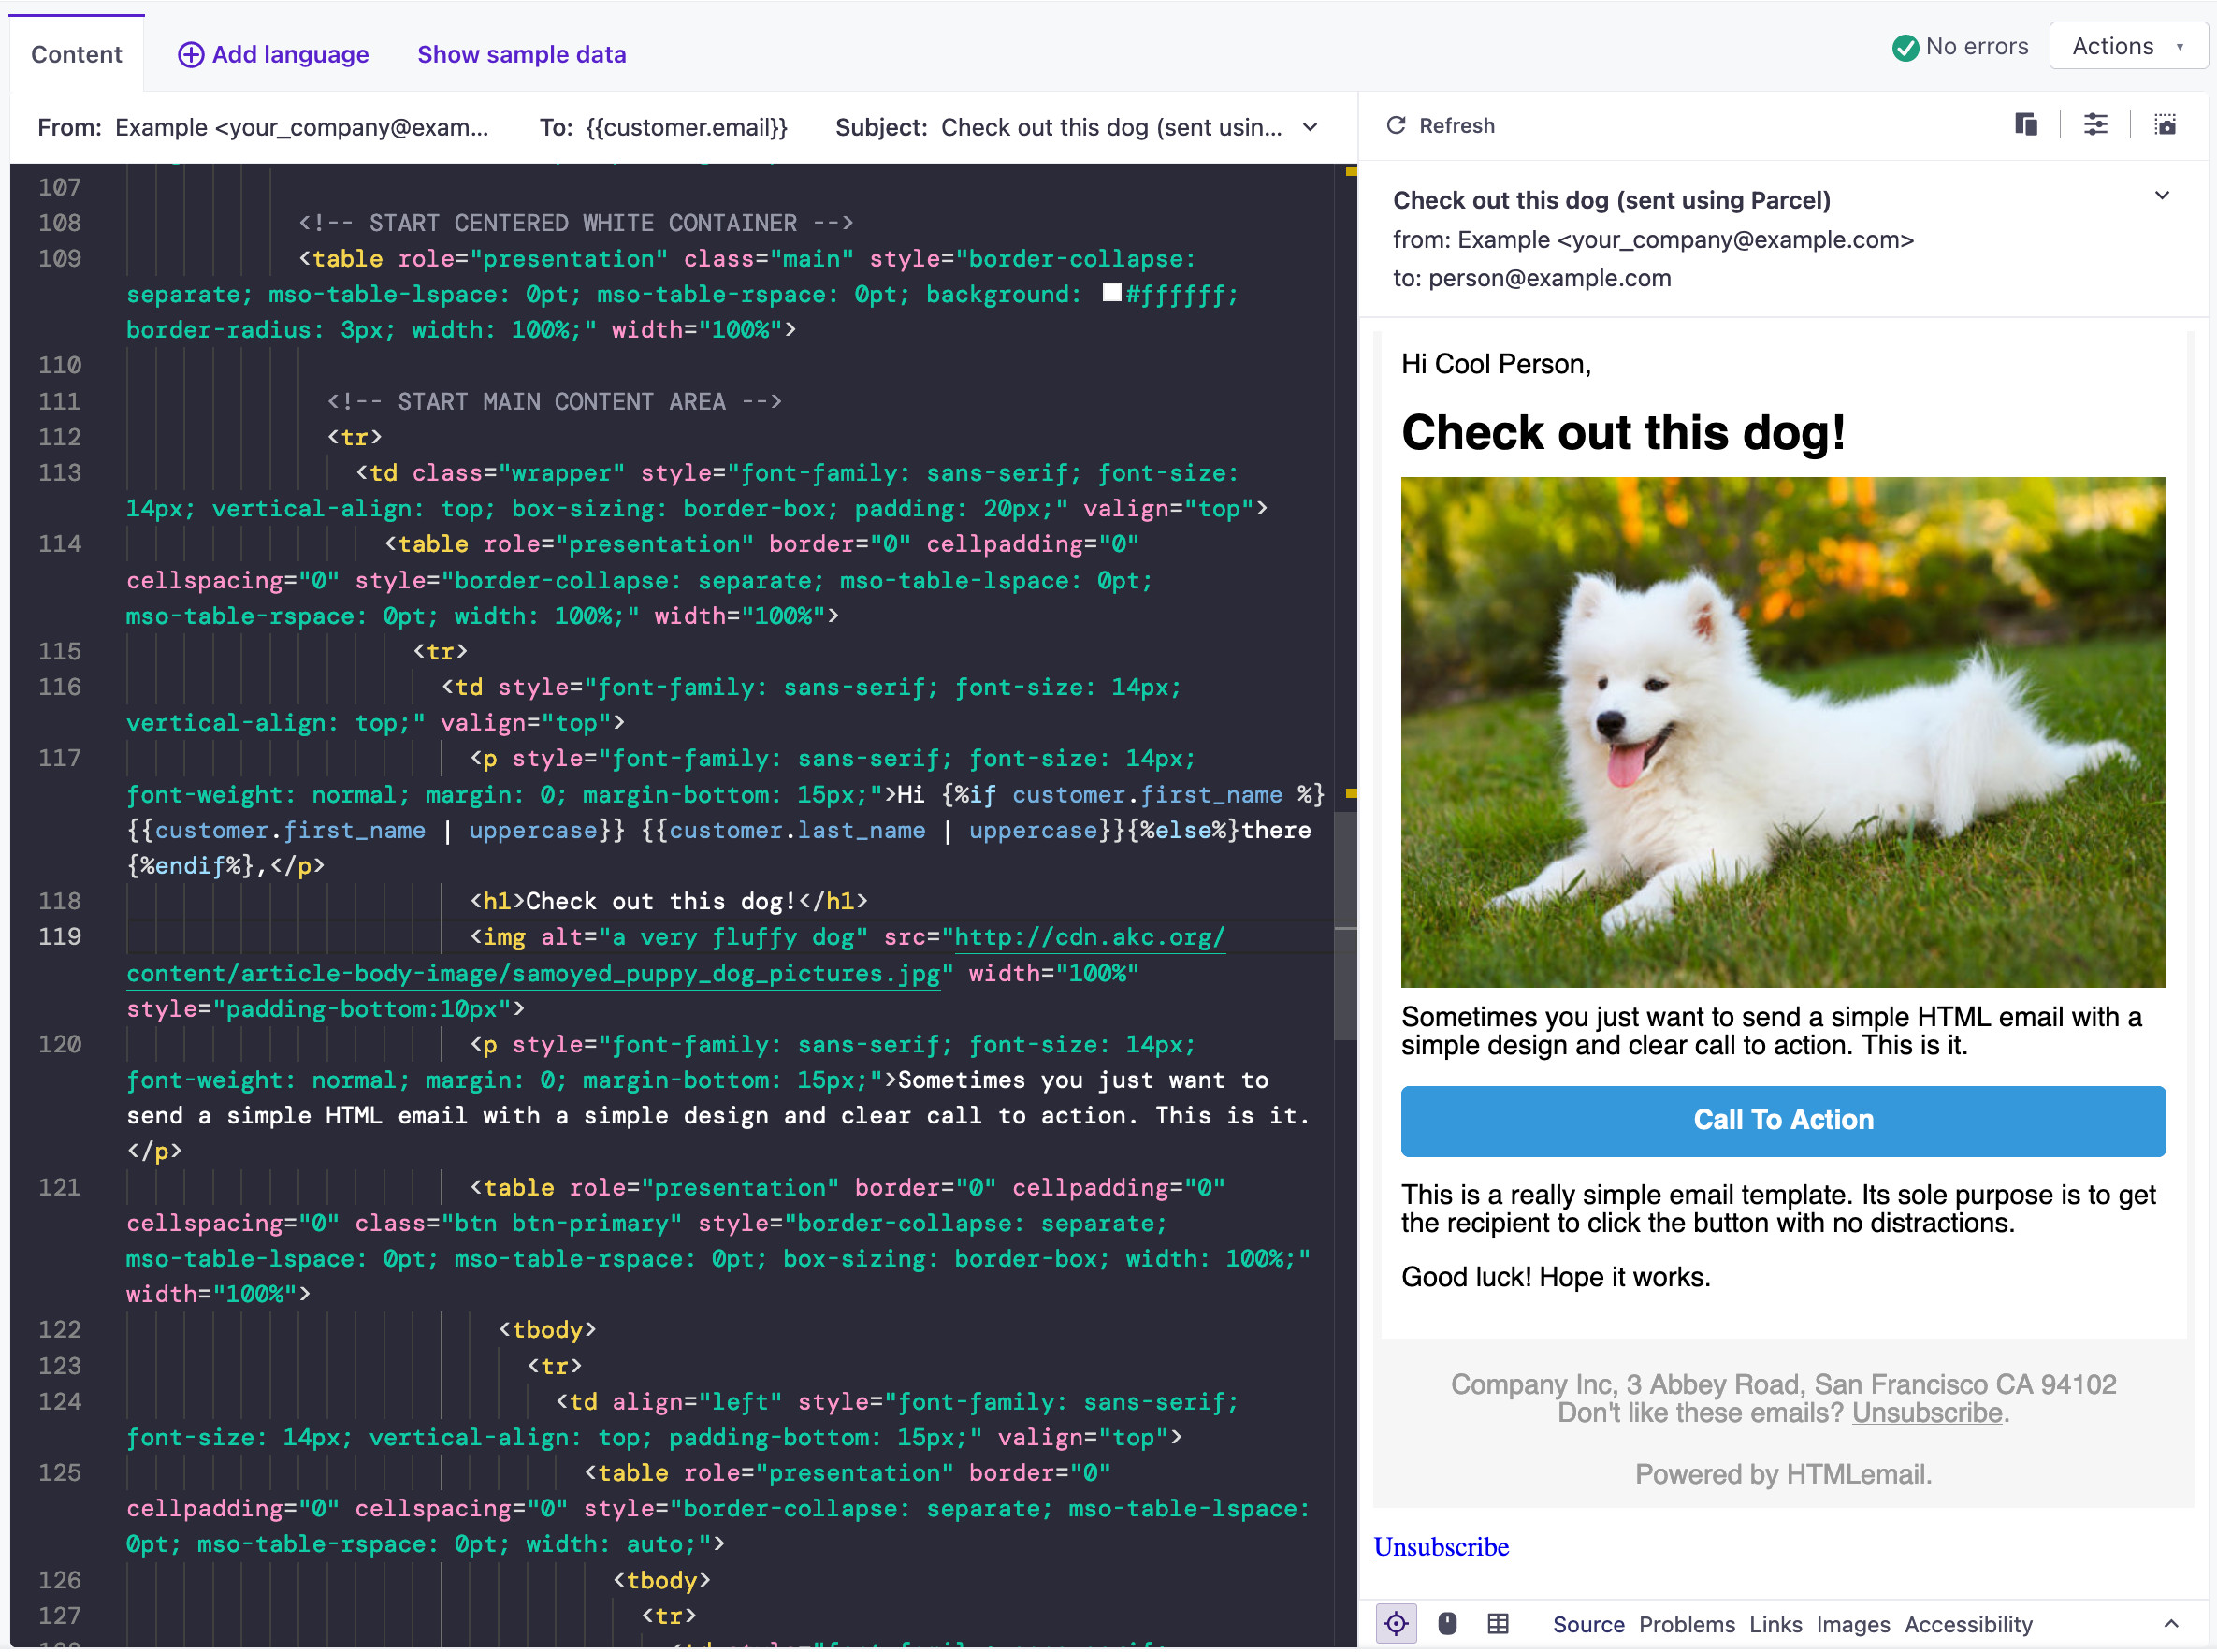 Parcel's code editor helps you craft better emails